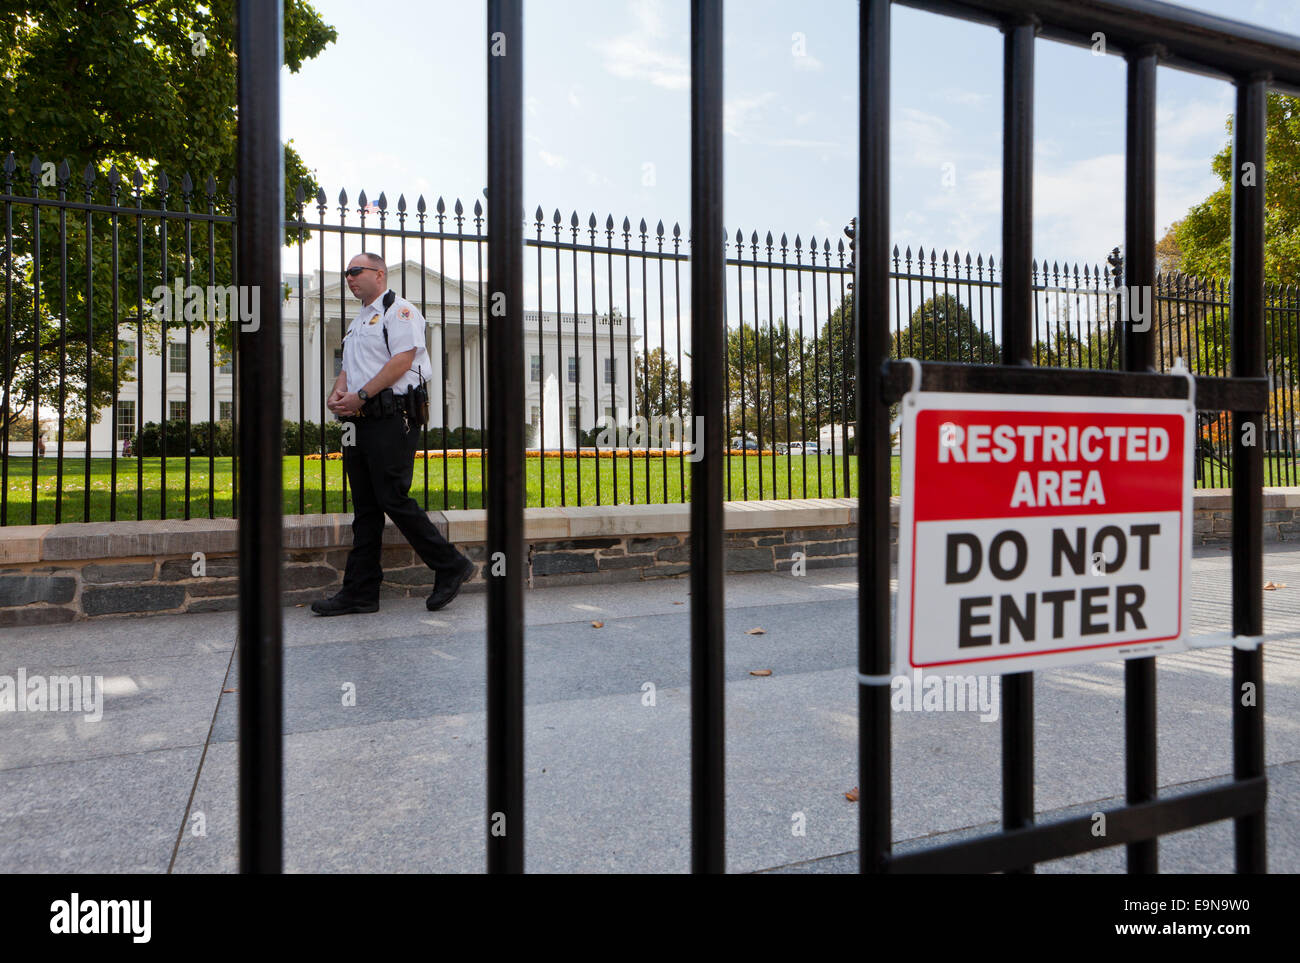 Secret Service police officer behind barricades placed in front of the White House fence - Washington, DC USA Stock Photo